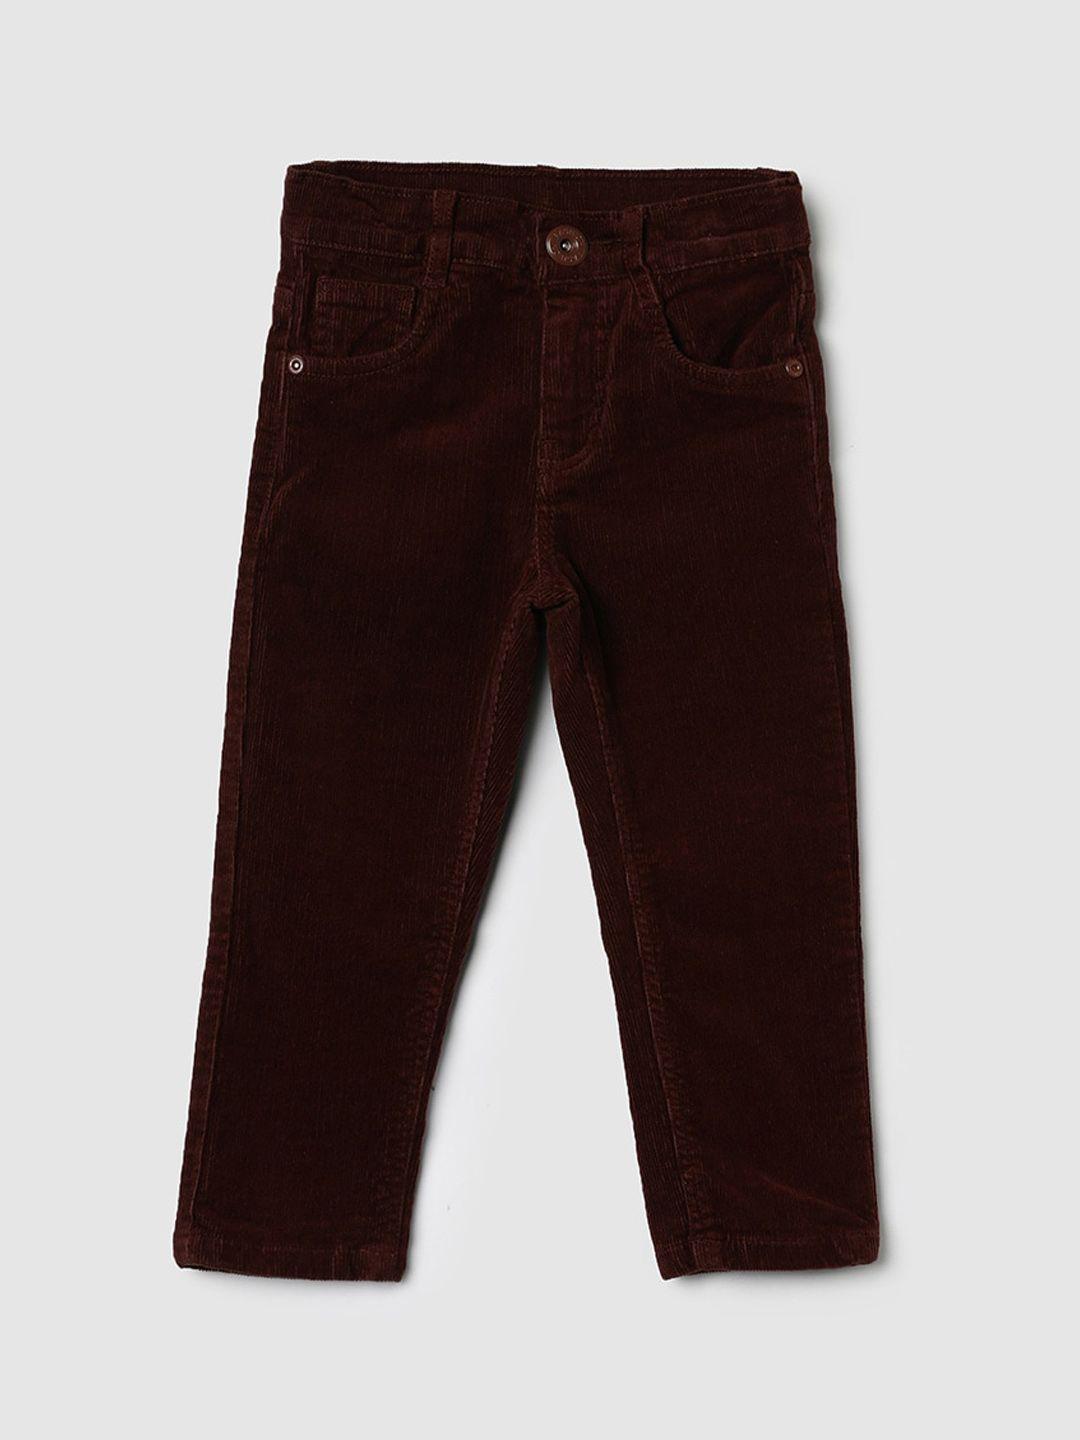 max-boys-brown-trousers